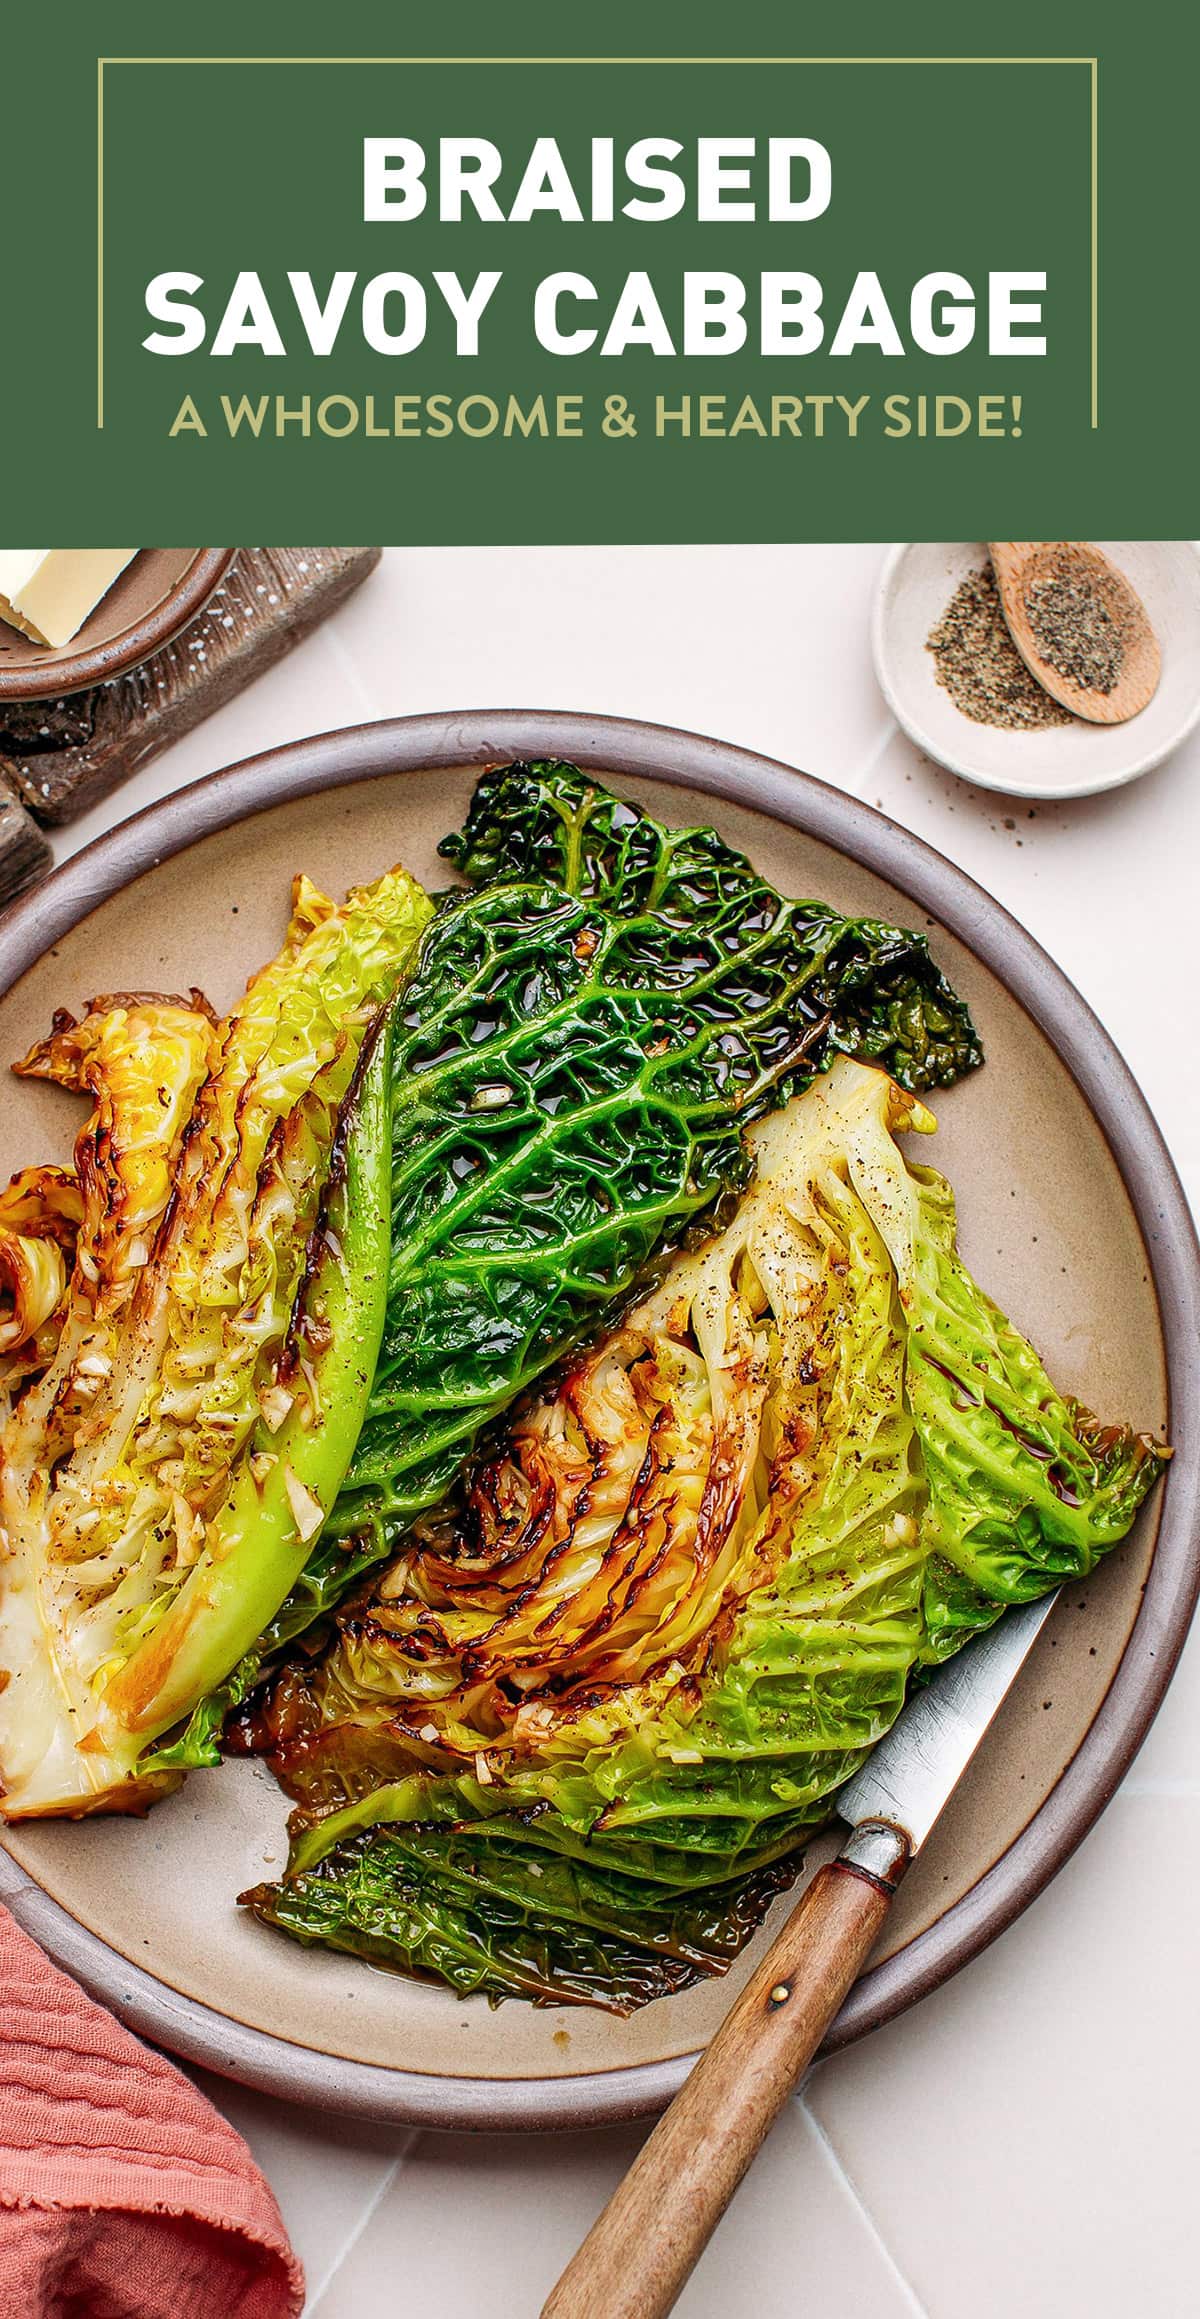 This braised savoy cabbage is juicy, caramelized to perfection, and infused with plenty of garlic! This mouth-watering side dish pairs wonderfully with steamed rice and your favorite plant-based protein for a wholesome and hearty meal. #cabbage #vegan